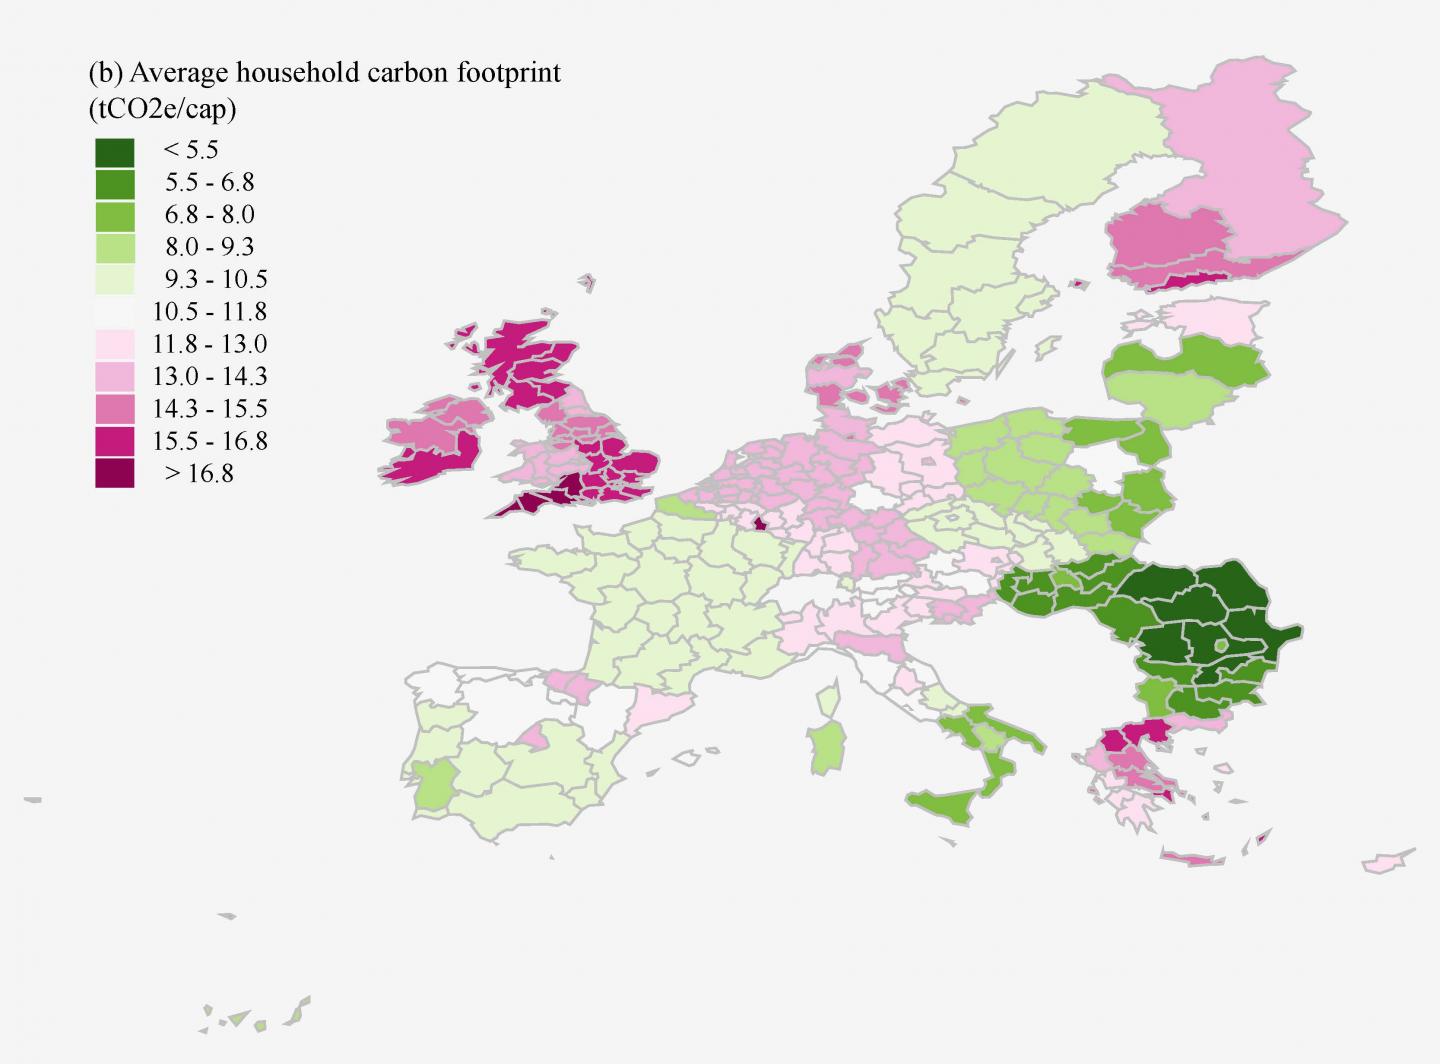 Average Household Carbon Footprint for the EU